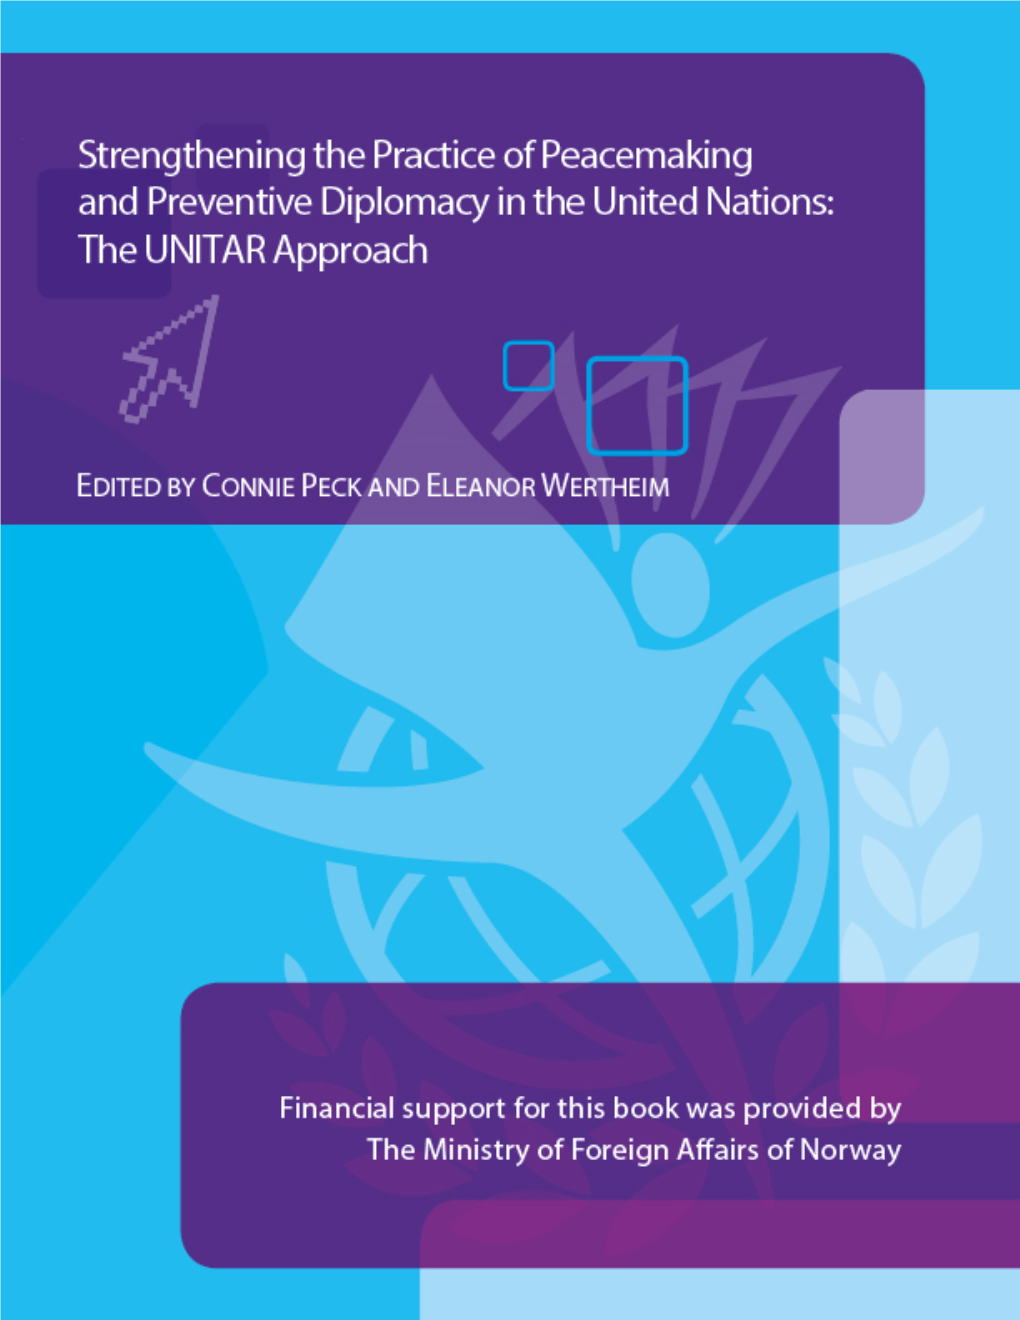 Strengthening the Practice of Peacemaking and Preventive Diplomacy in the United Nations: the UNITAR Approach